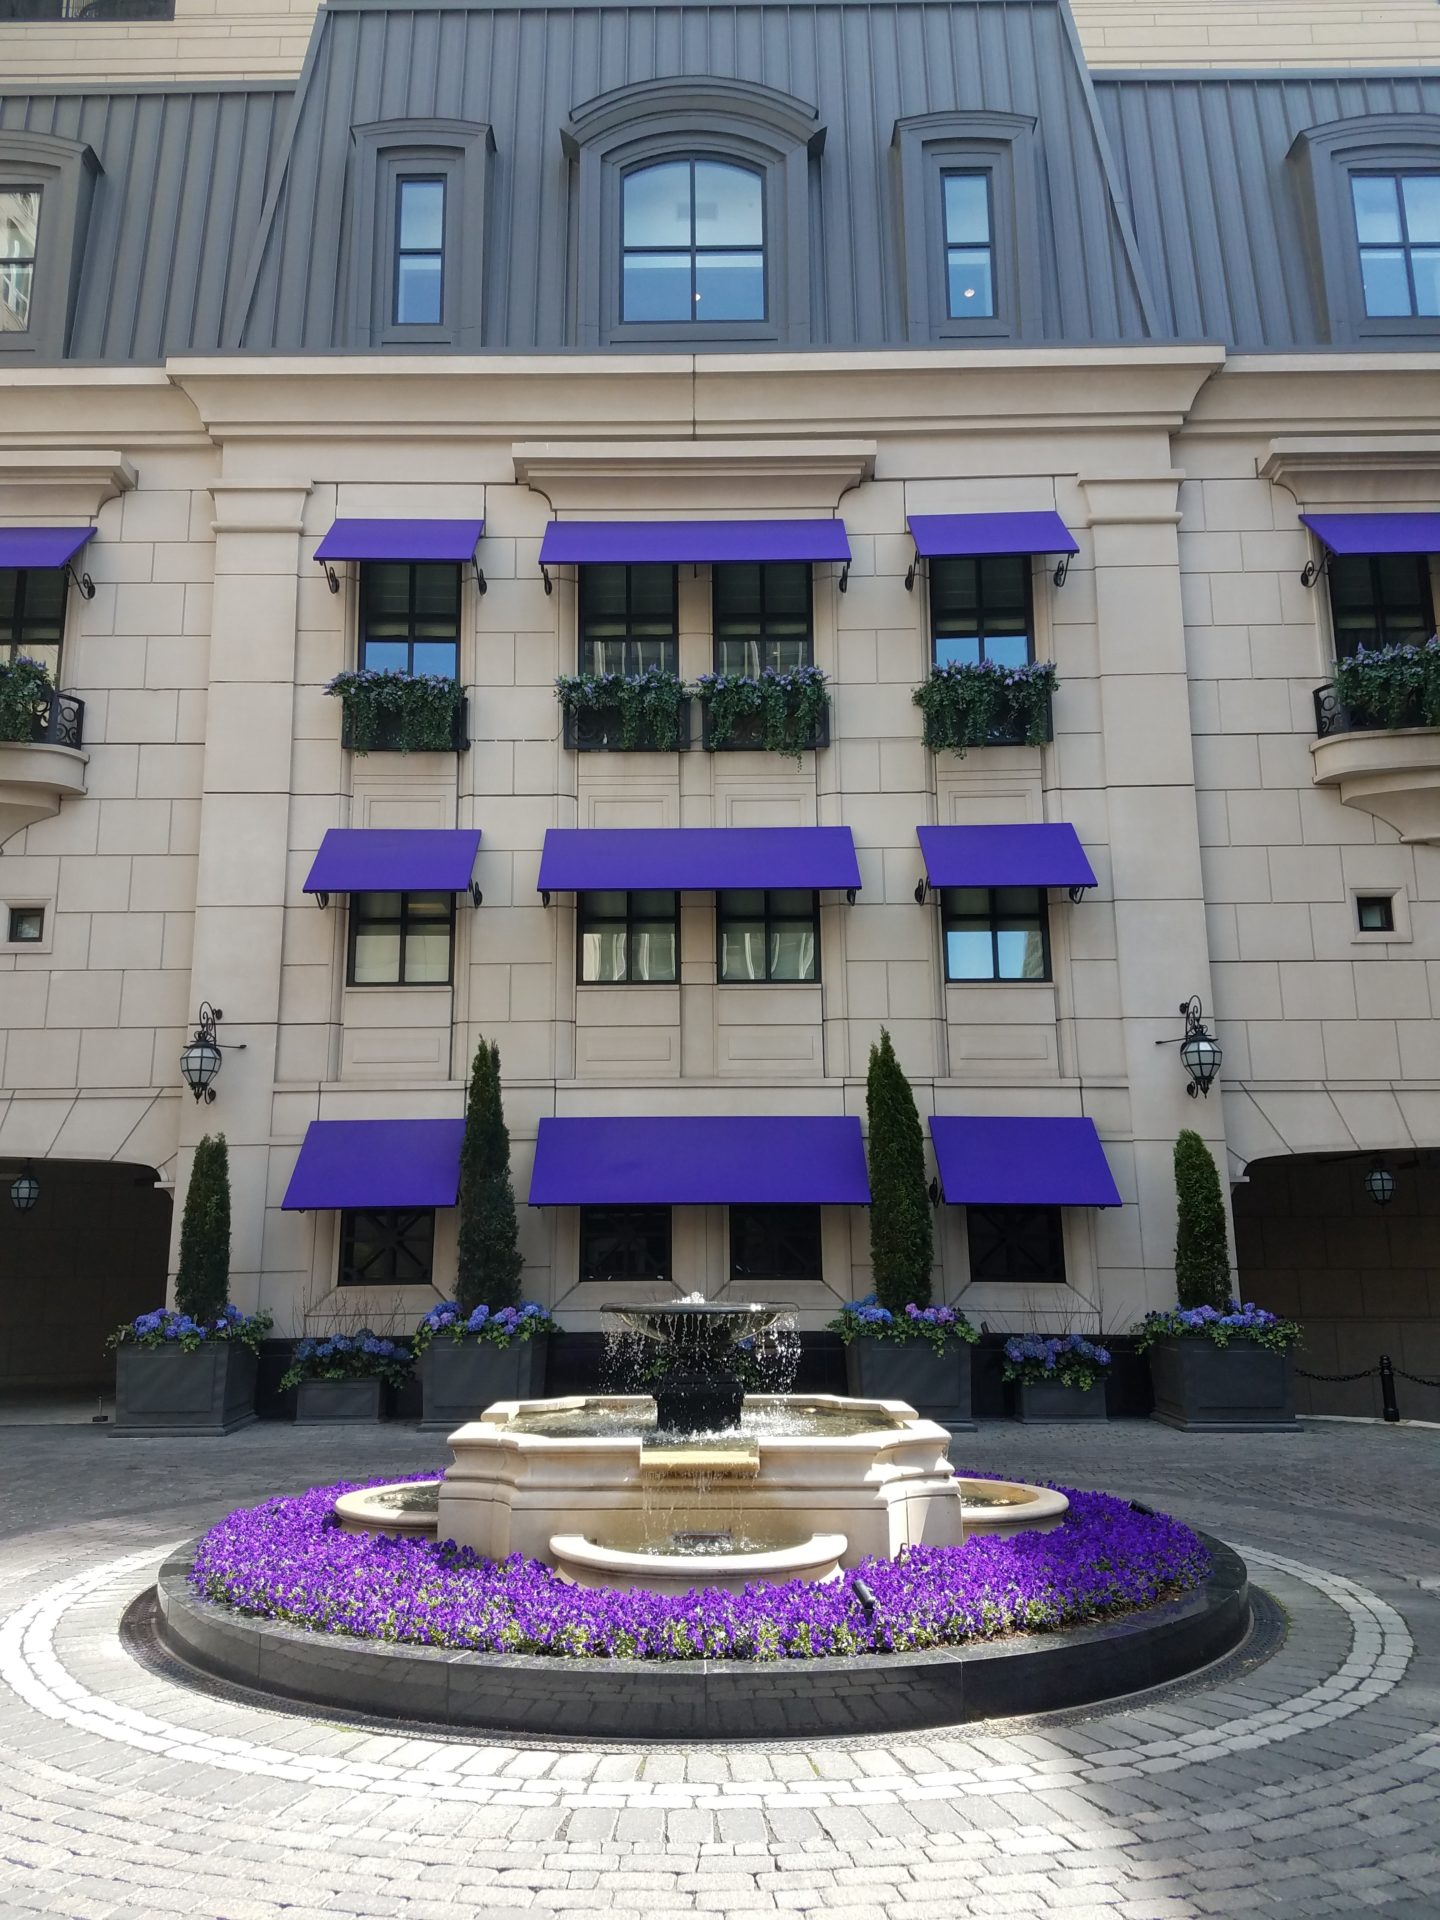 a fountain in front of a building with purple awnings